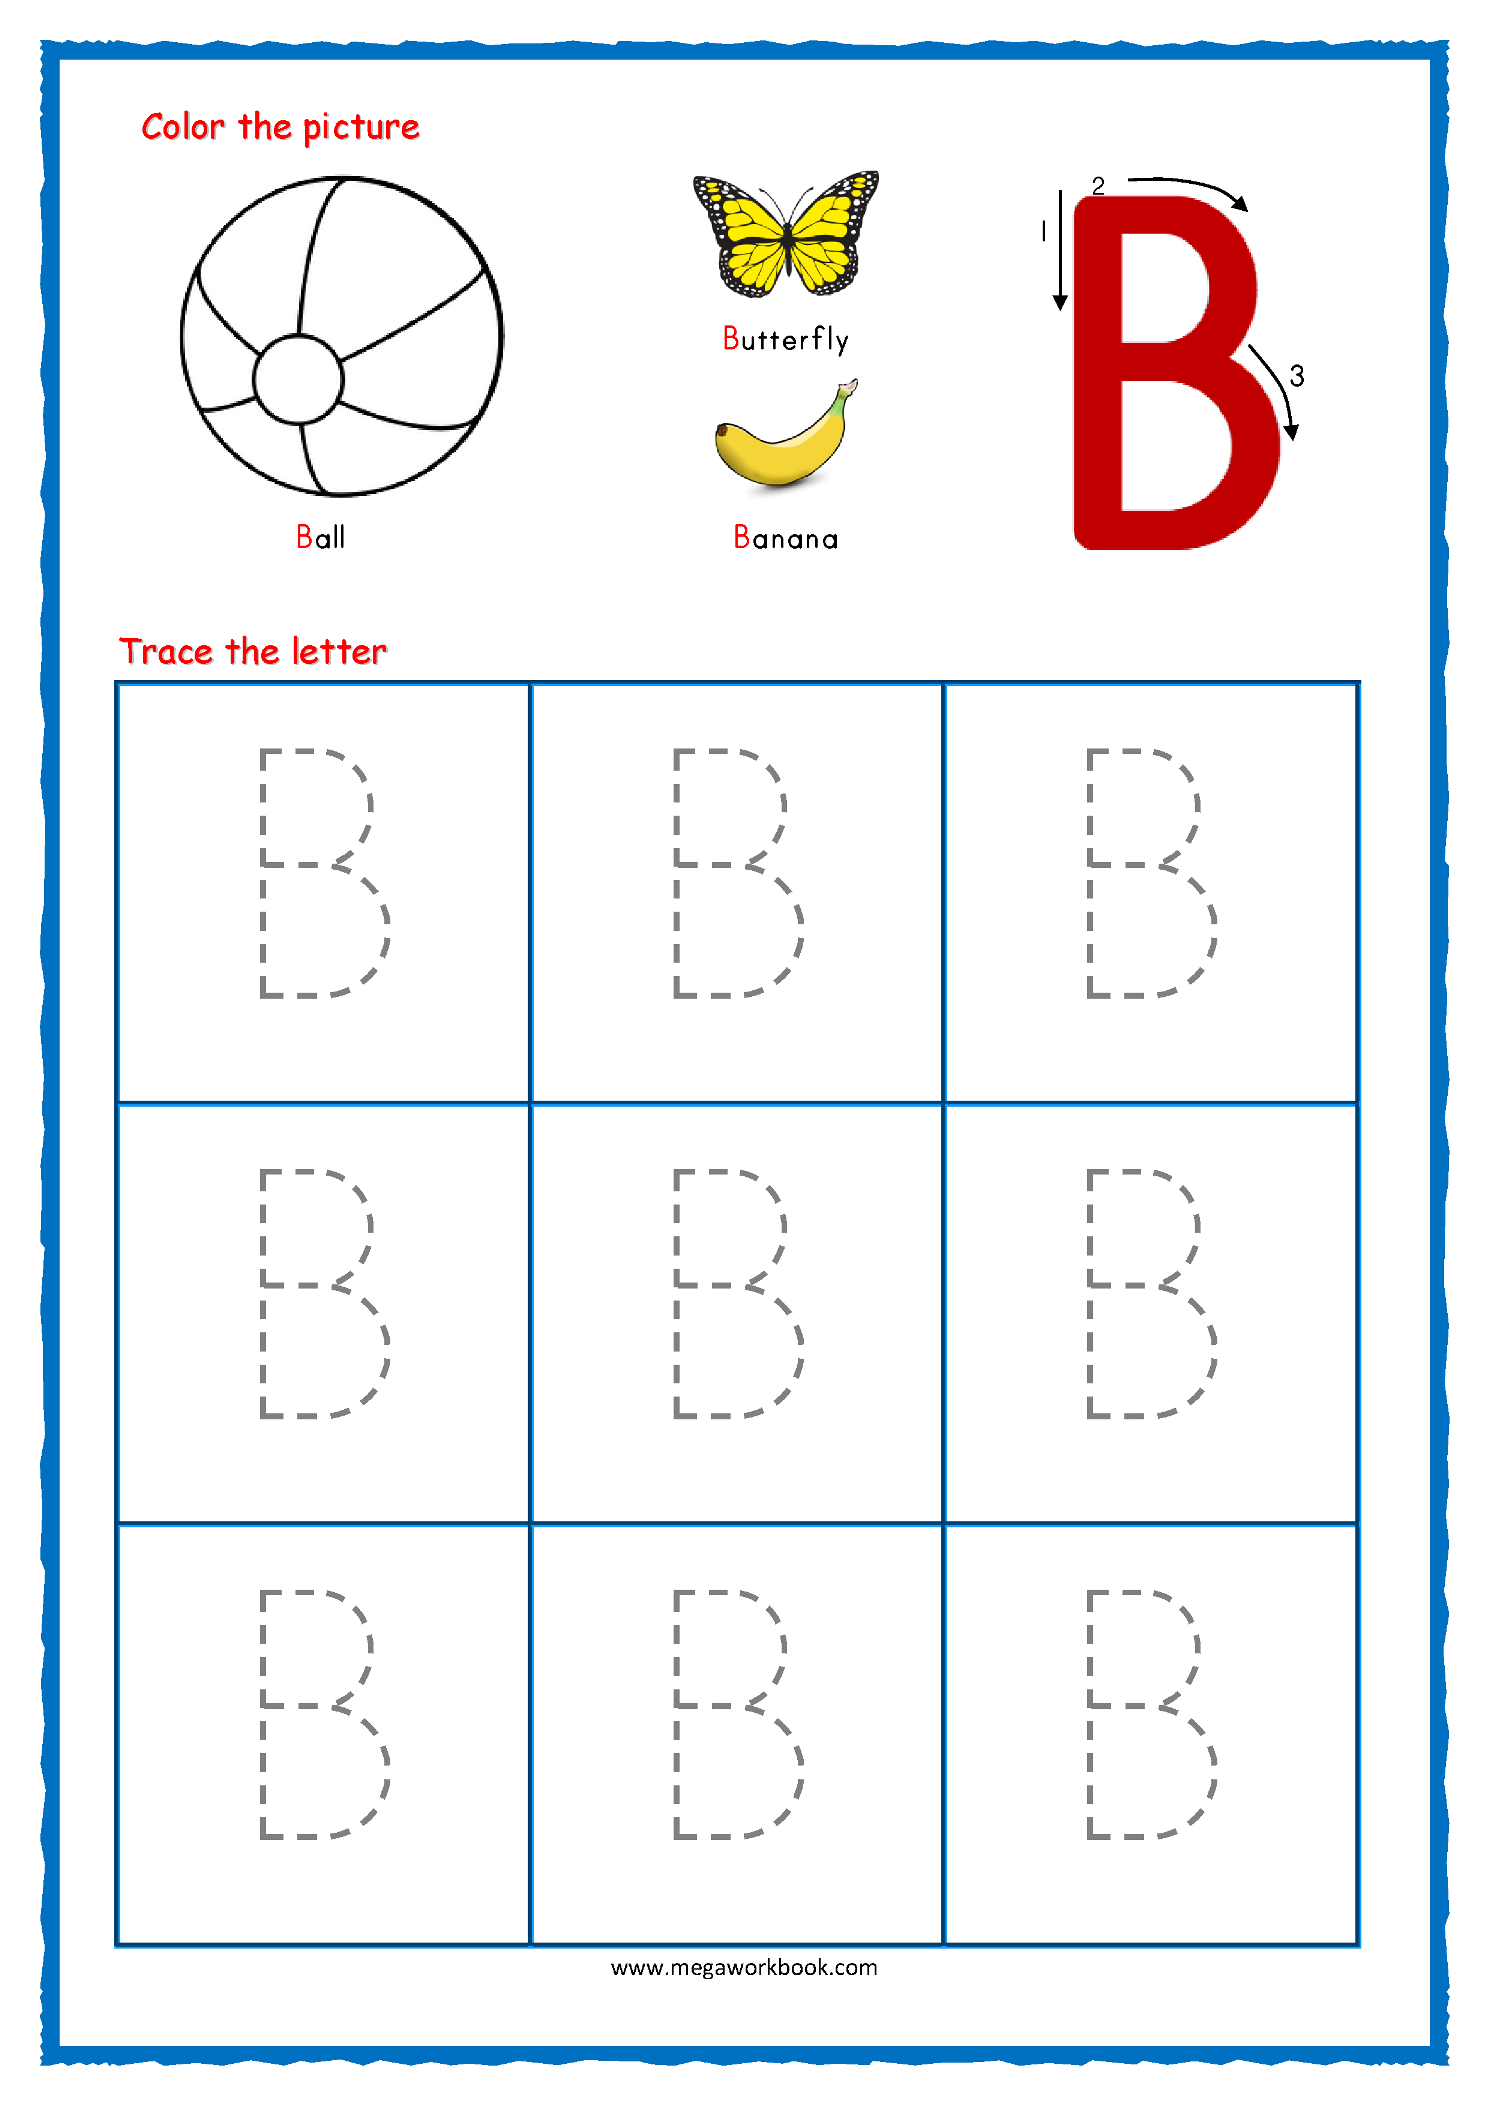 Free Printable Letter B Tracing Worksheets - Printable Word Searches